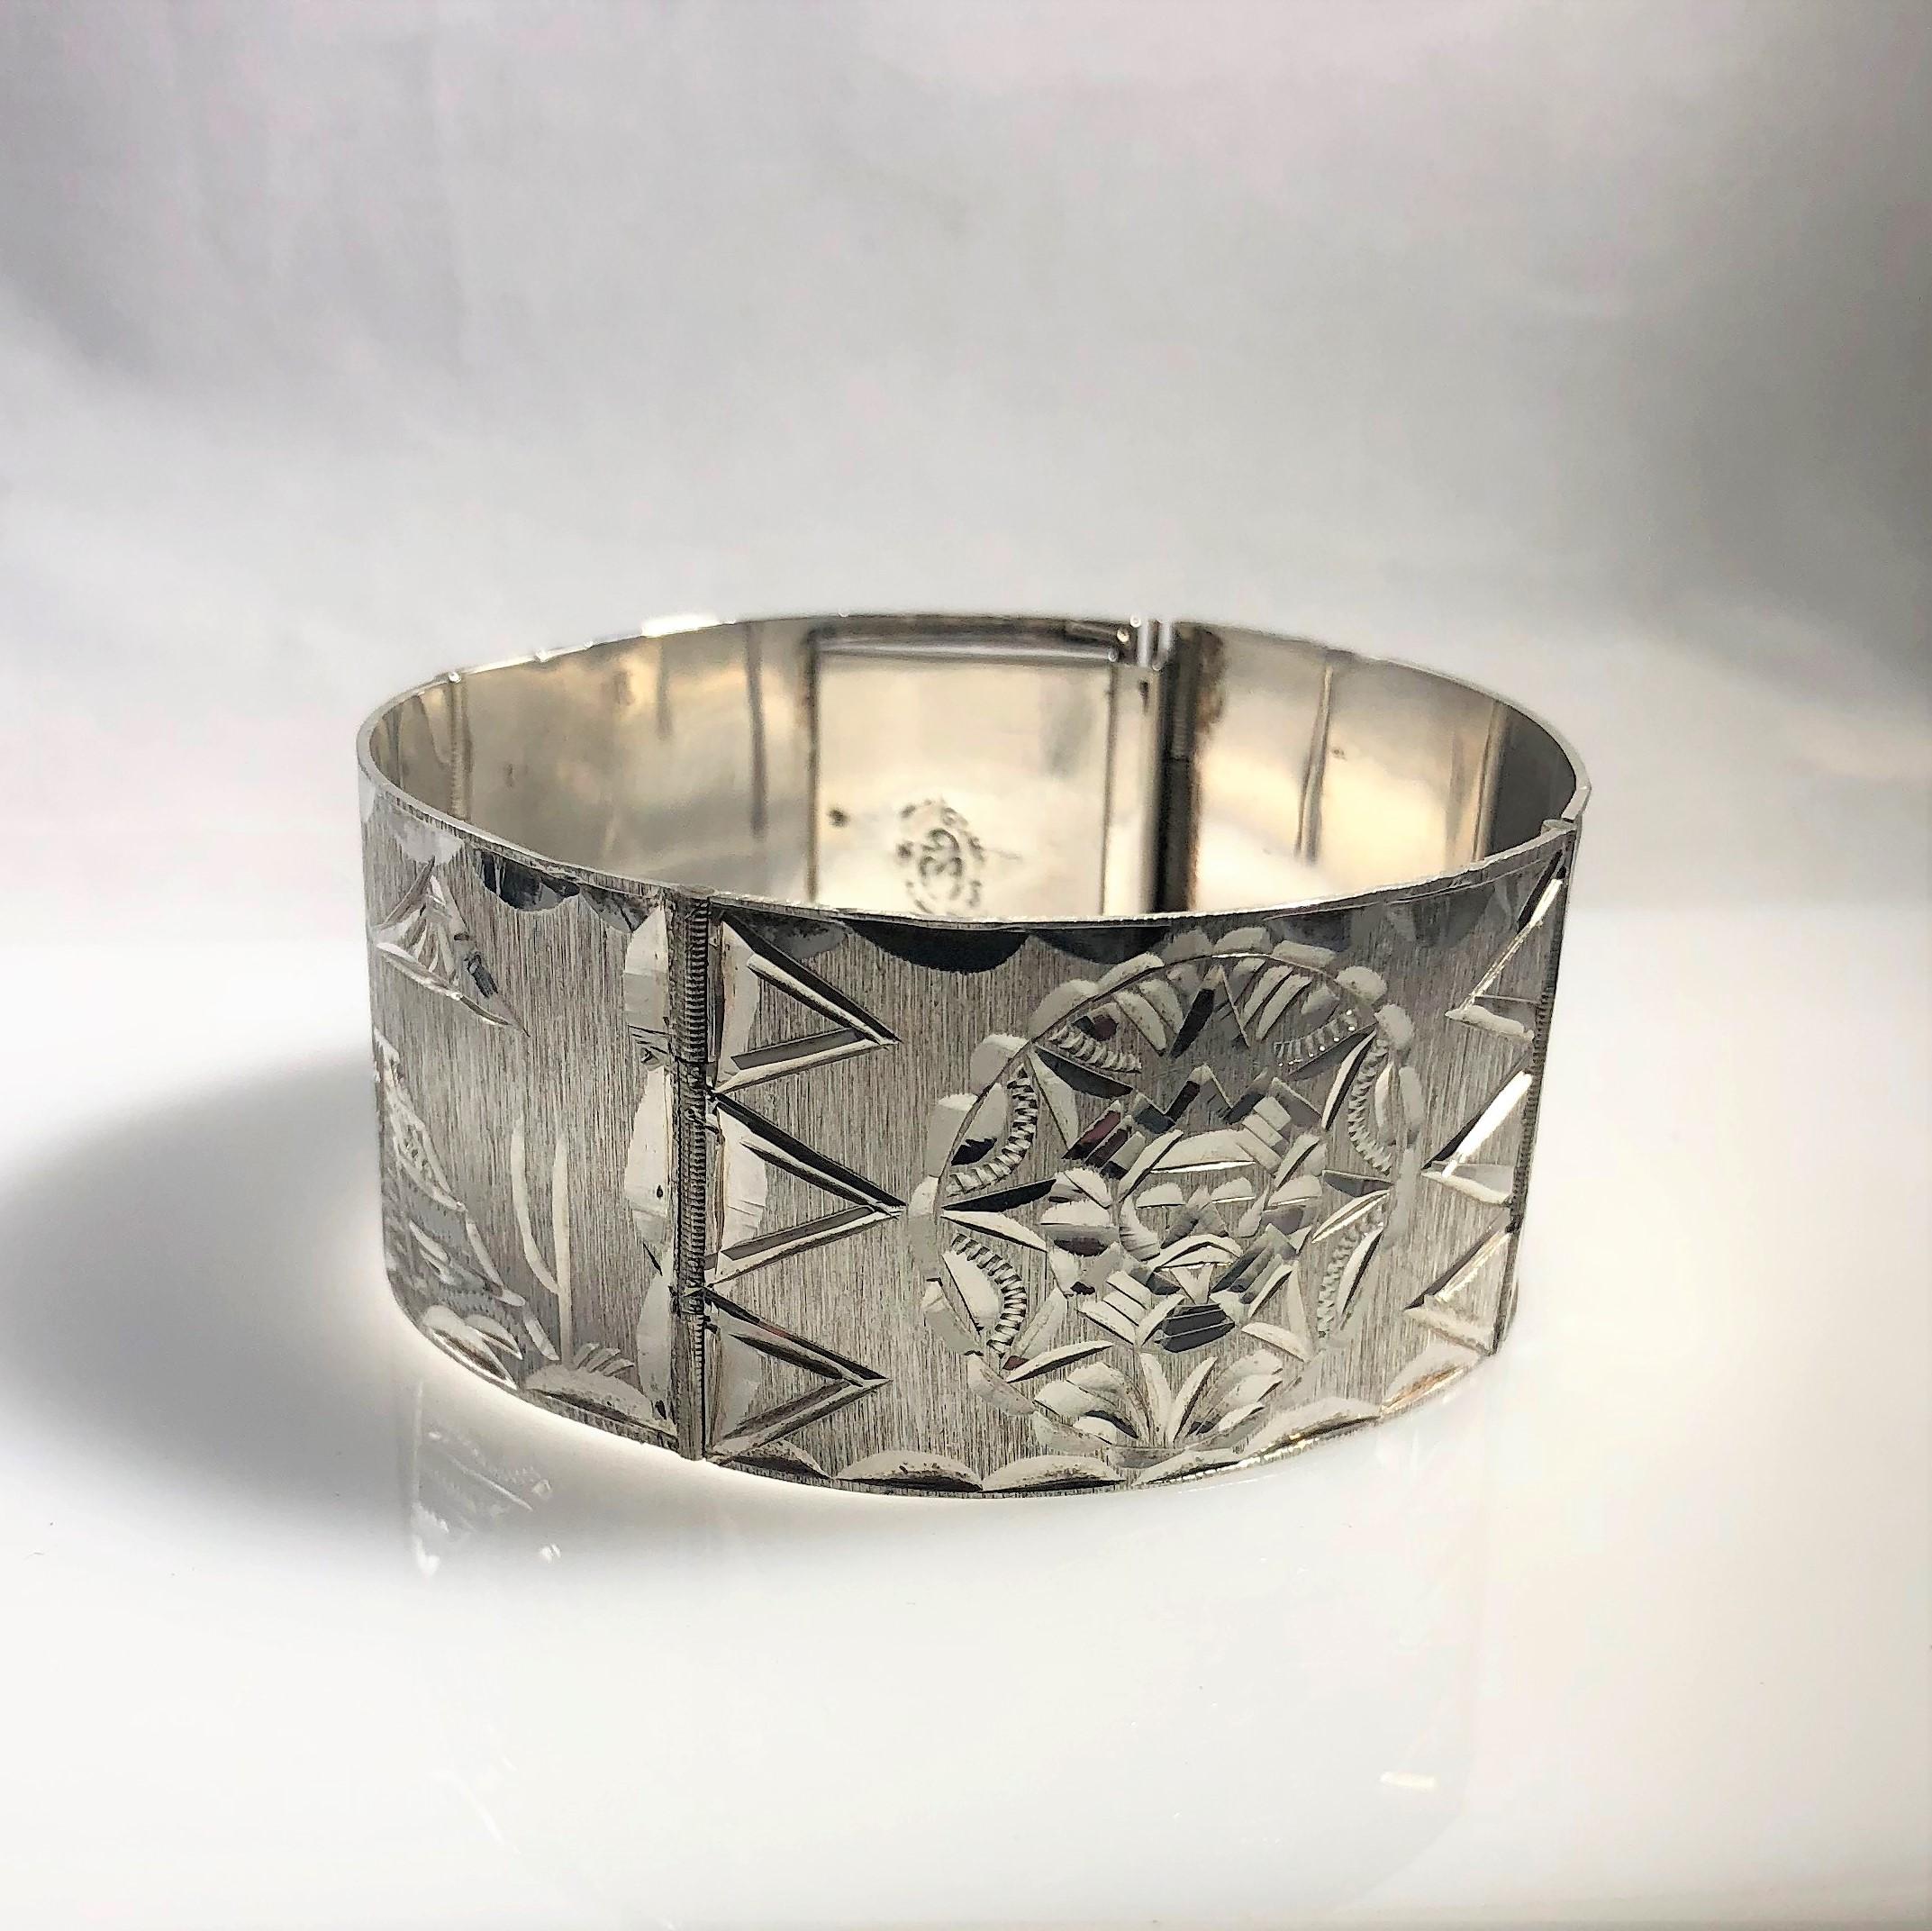 Vintage Mexican Mayan Sterling Silver Hand Engraved Cuff Bracelet. This is a very interesting and well made piece. This piece is estimated to be vintage,possibly Aztec and is made of sterling silver, 925, it weighs 34.2 grams. We believe that the